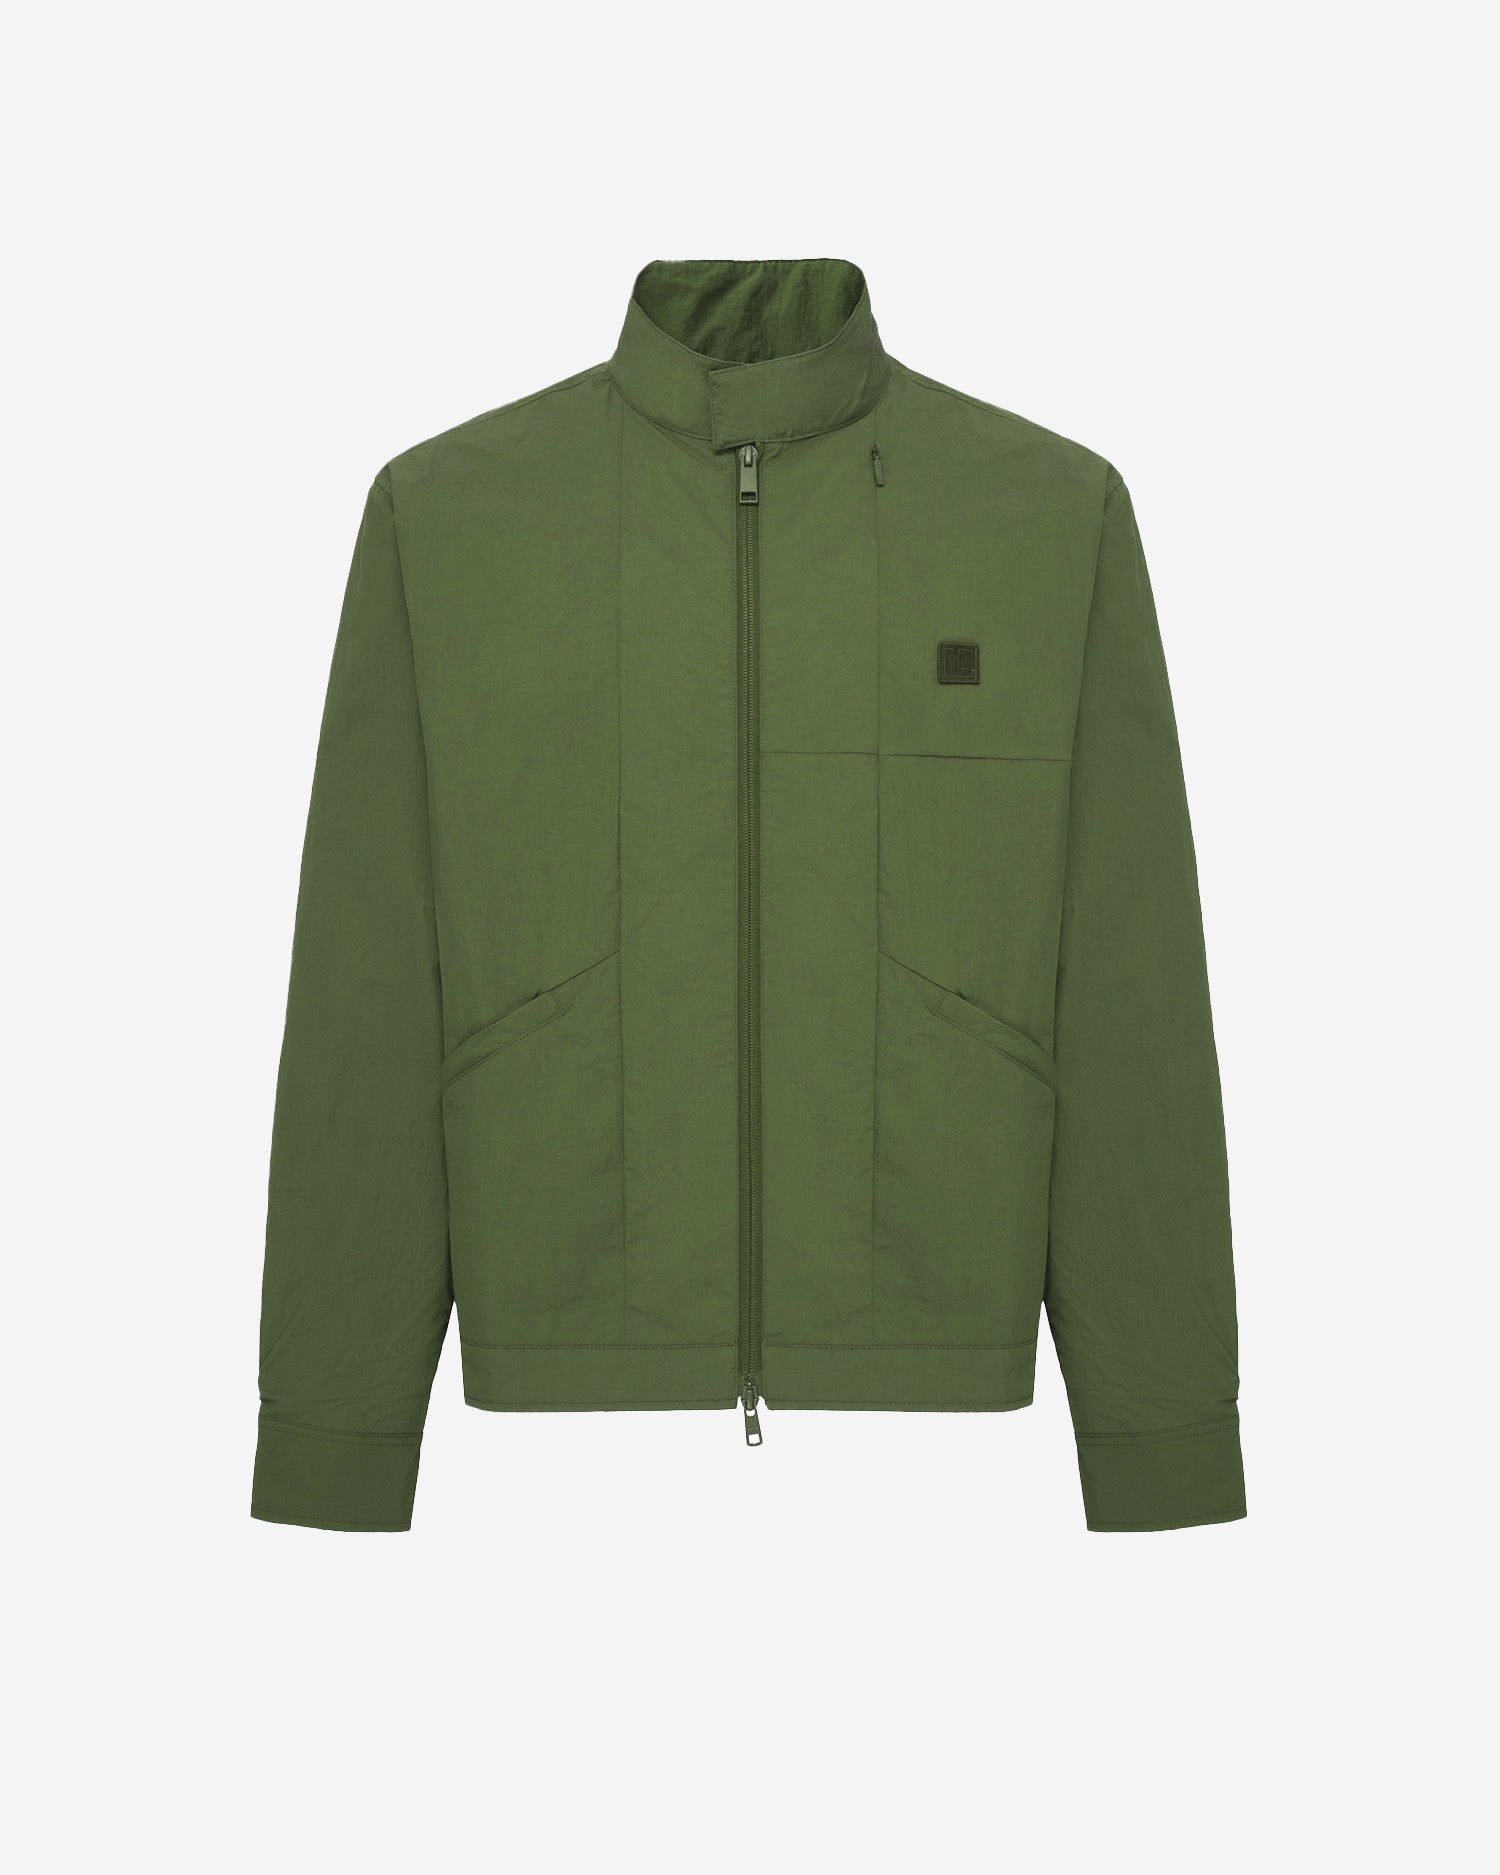 Men's Crew Jacket in Military Green 01 #military-green